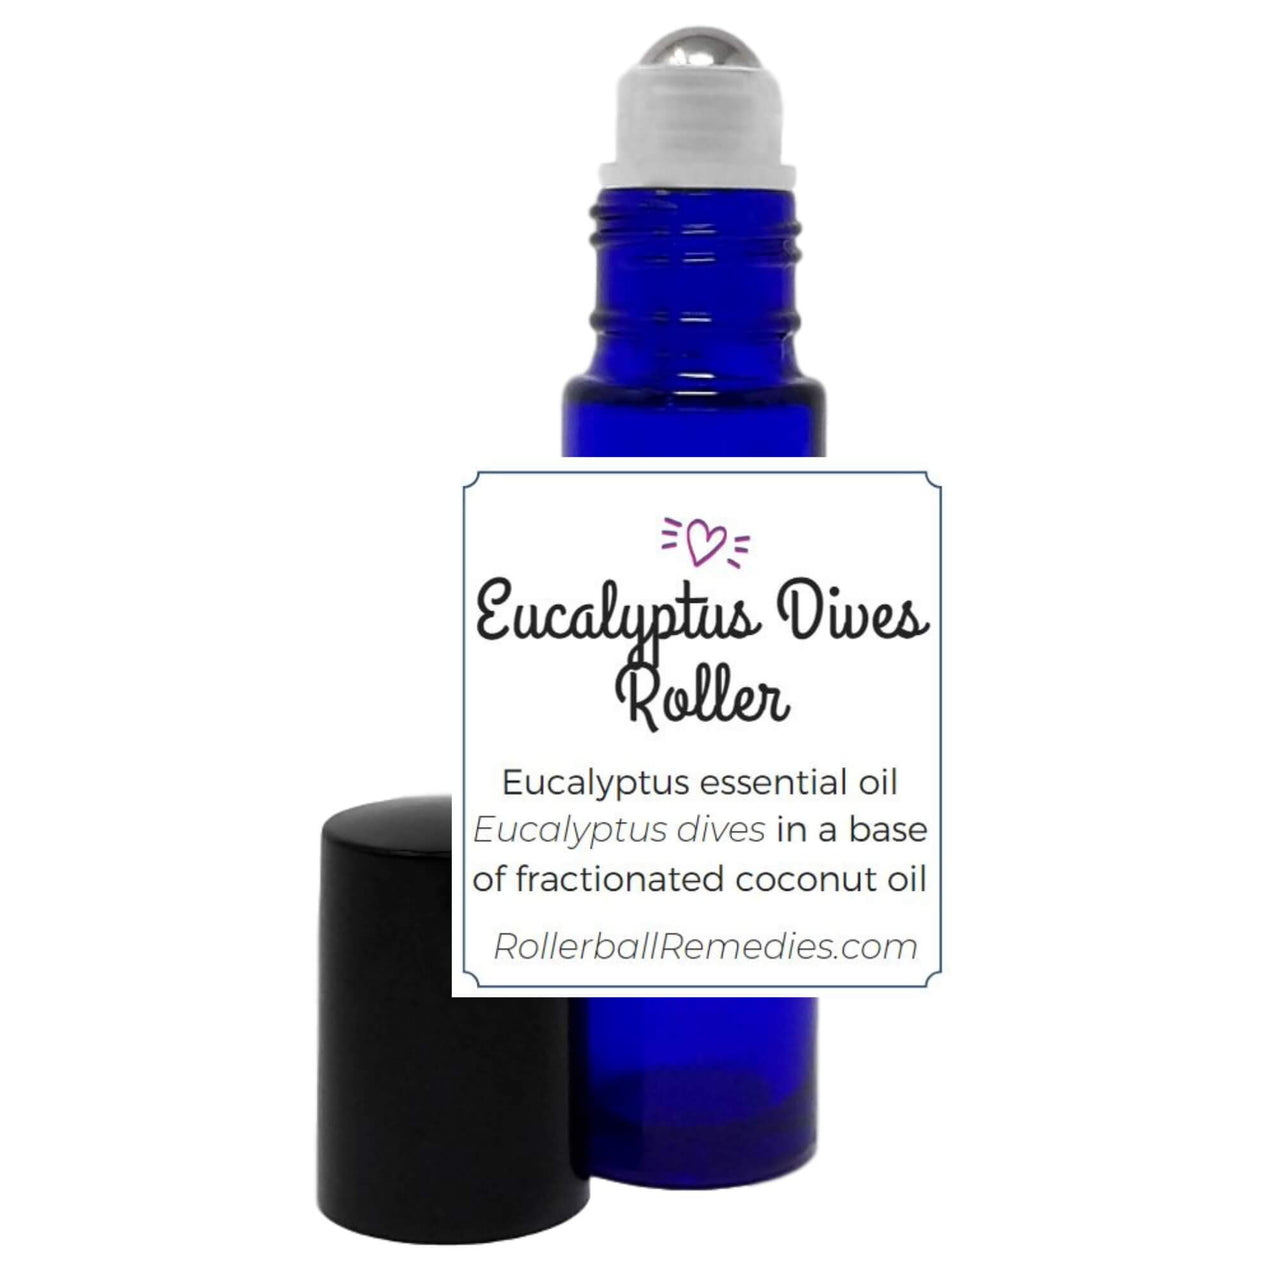 Eucalyptus Dives Essential Oil Roller Blend 10 ml for Kids and Respiratory Support